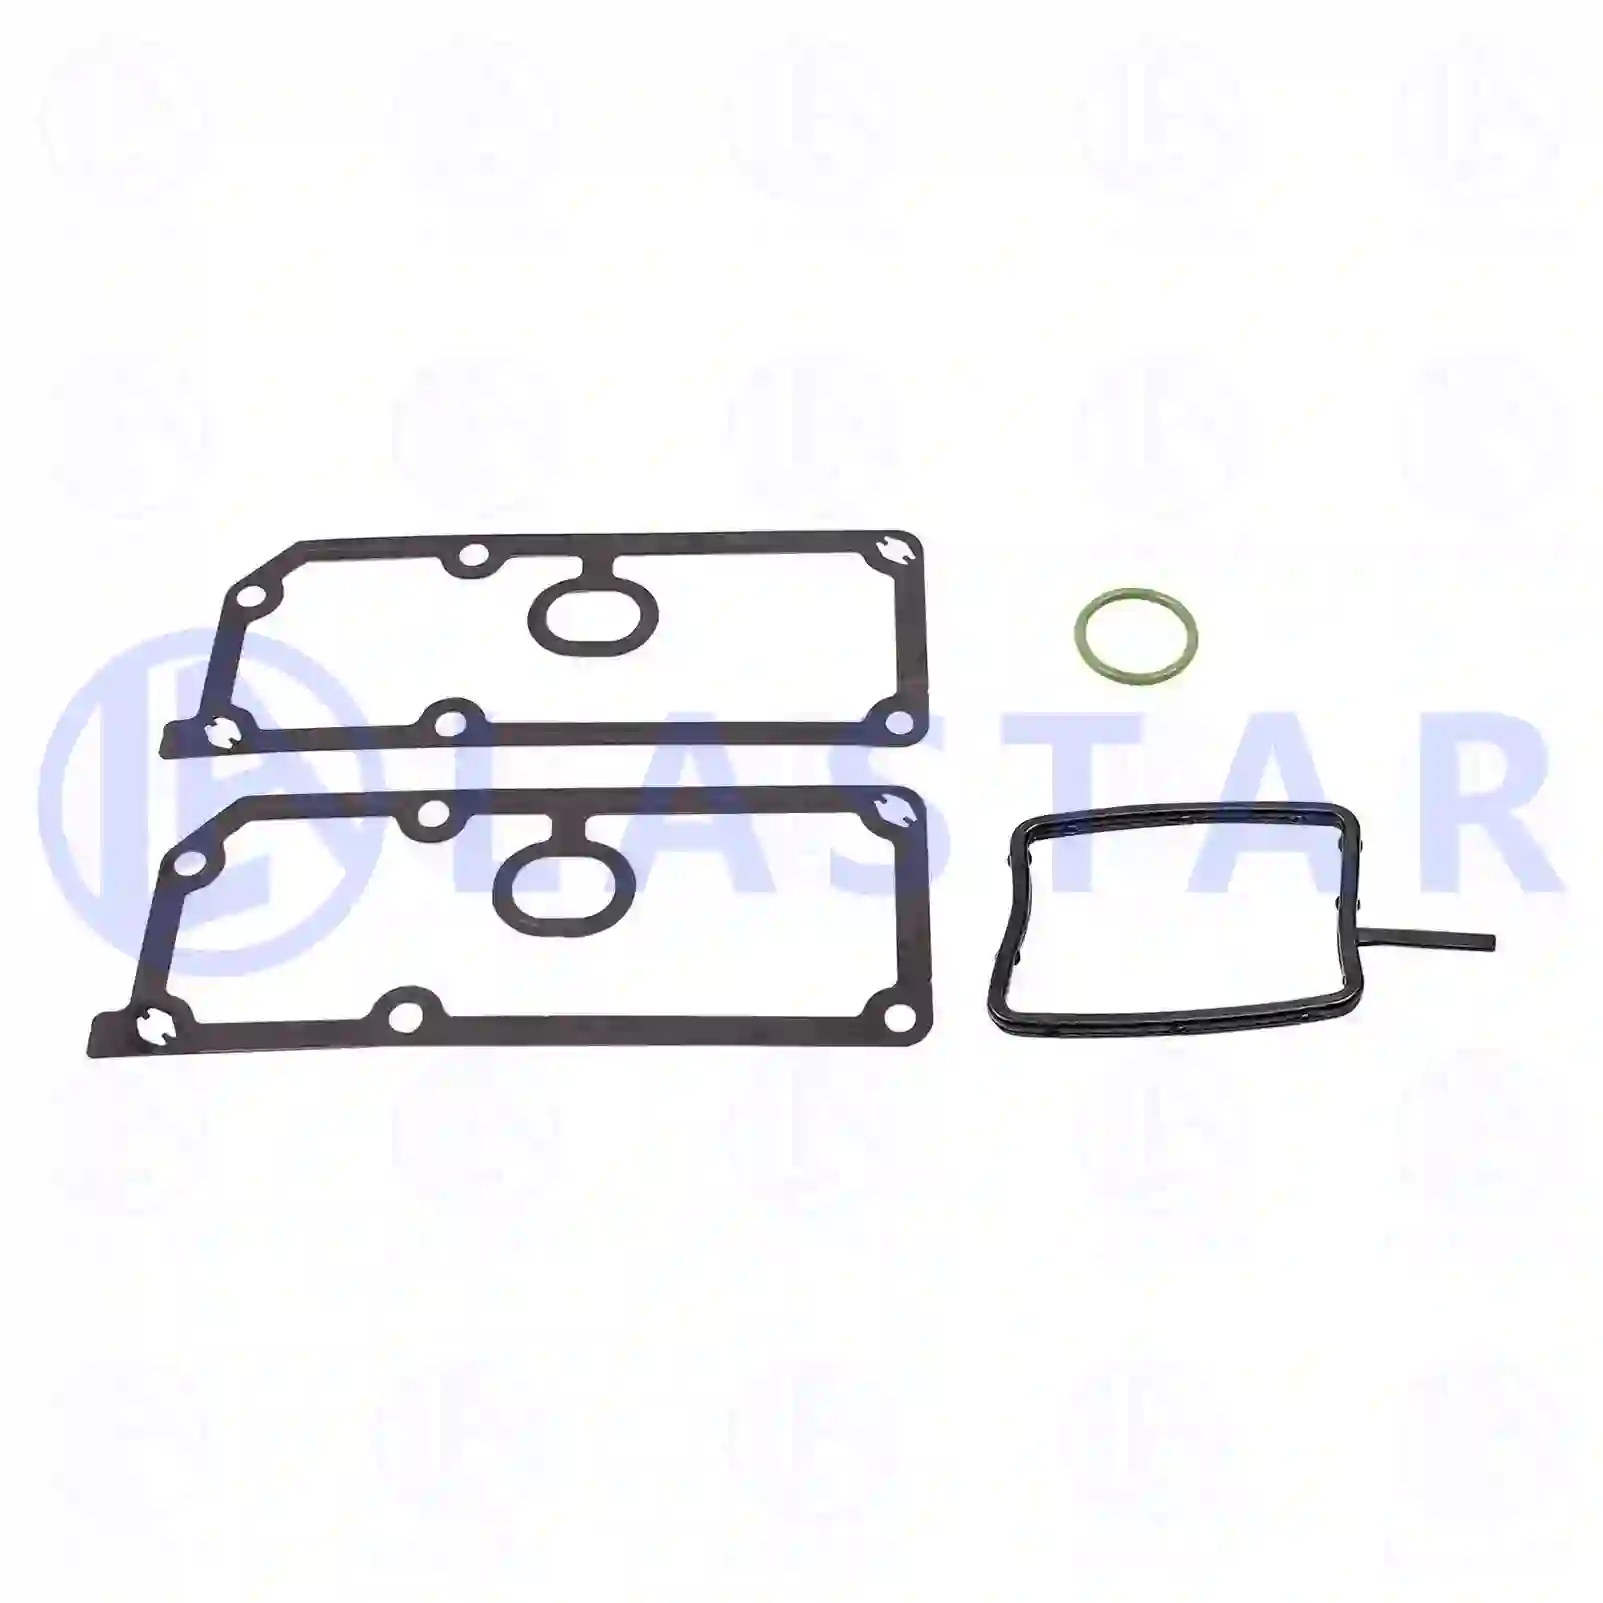 Gasket kit, oil cleaner, 77704749, 1542640S, 1757826S, 1885869S1 ||  77704749 Lastar Spare Part | Truck Spare Parts, Auotomotive Spare Parts Gasket kit, oil cleaner, 77704749, 1542640S, 1757826S, 1885869S1 ||  77704749 Lastar Spare Part | Truck Spare Parts, Auotomotive Spare Parts